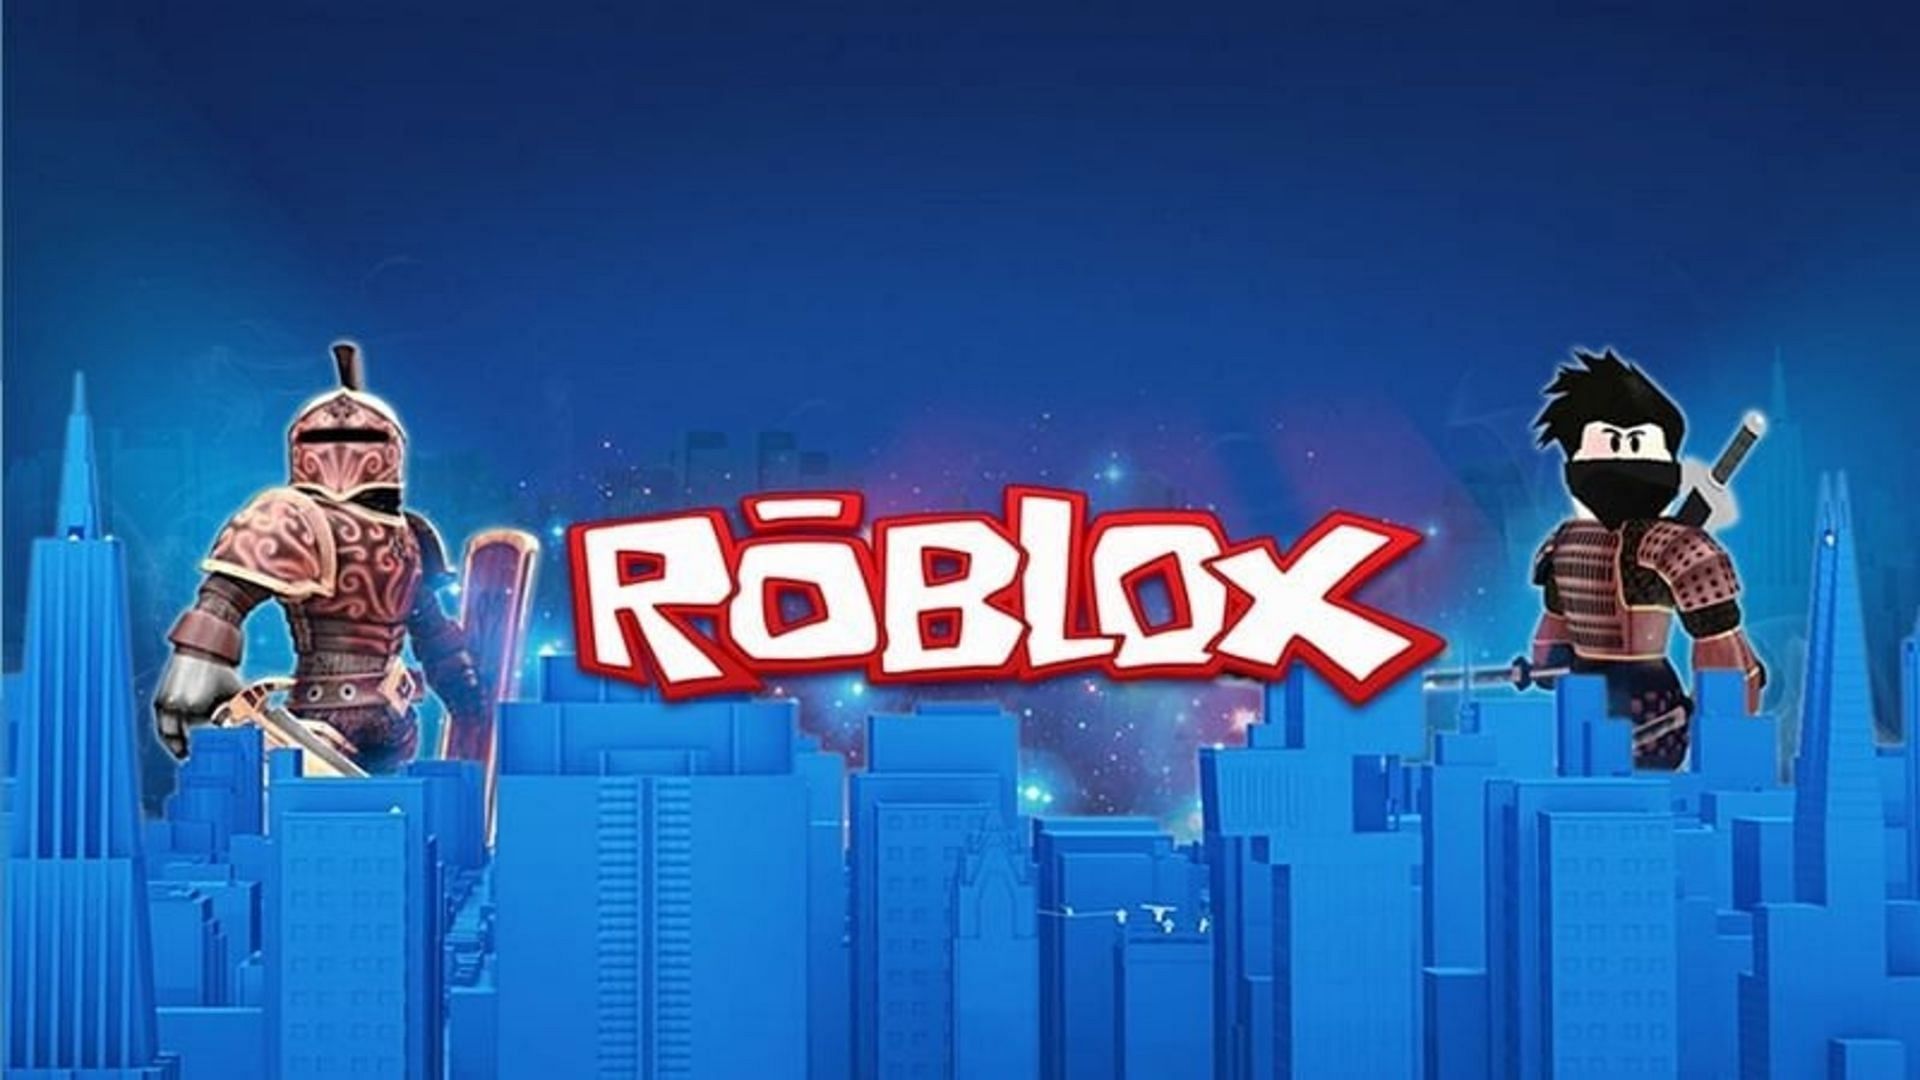 Not even anime is safe from Roblox (Image via Roblox)